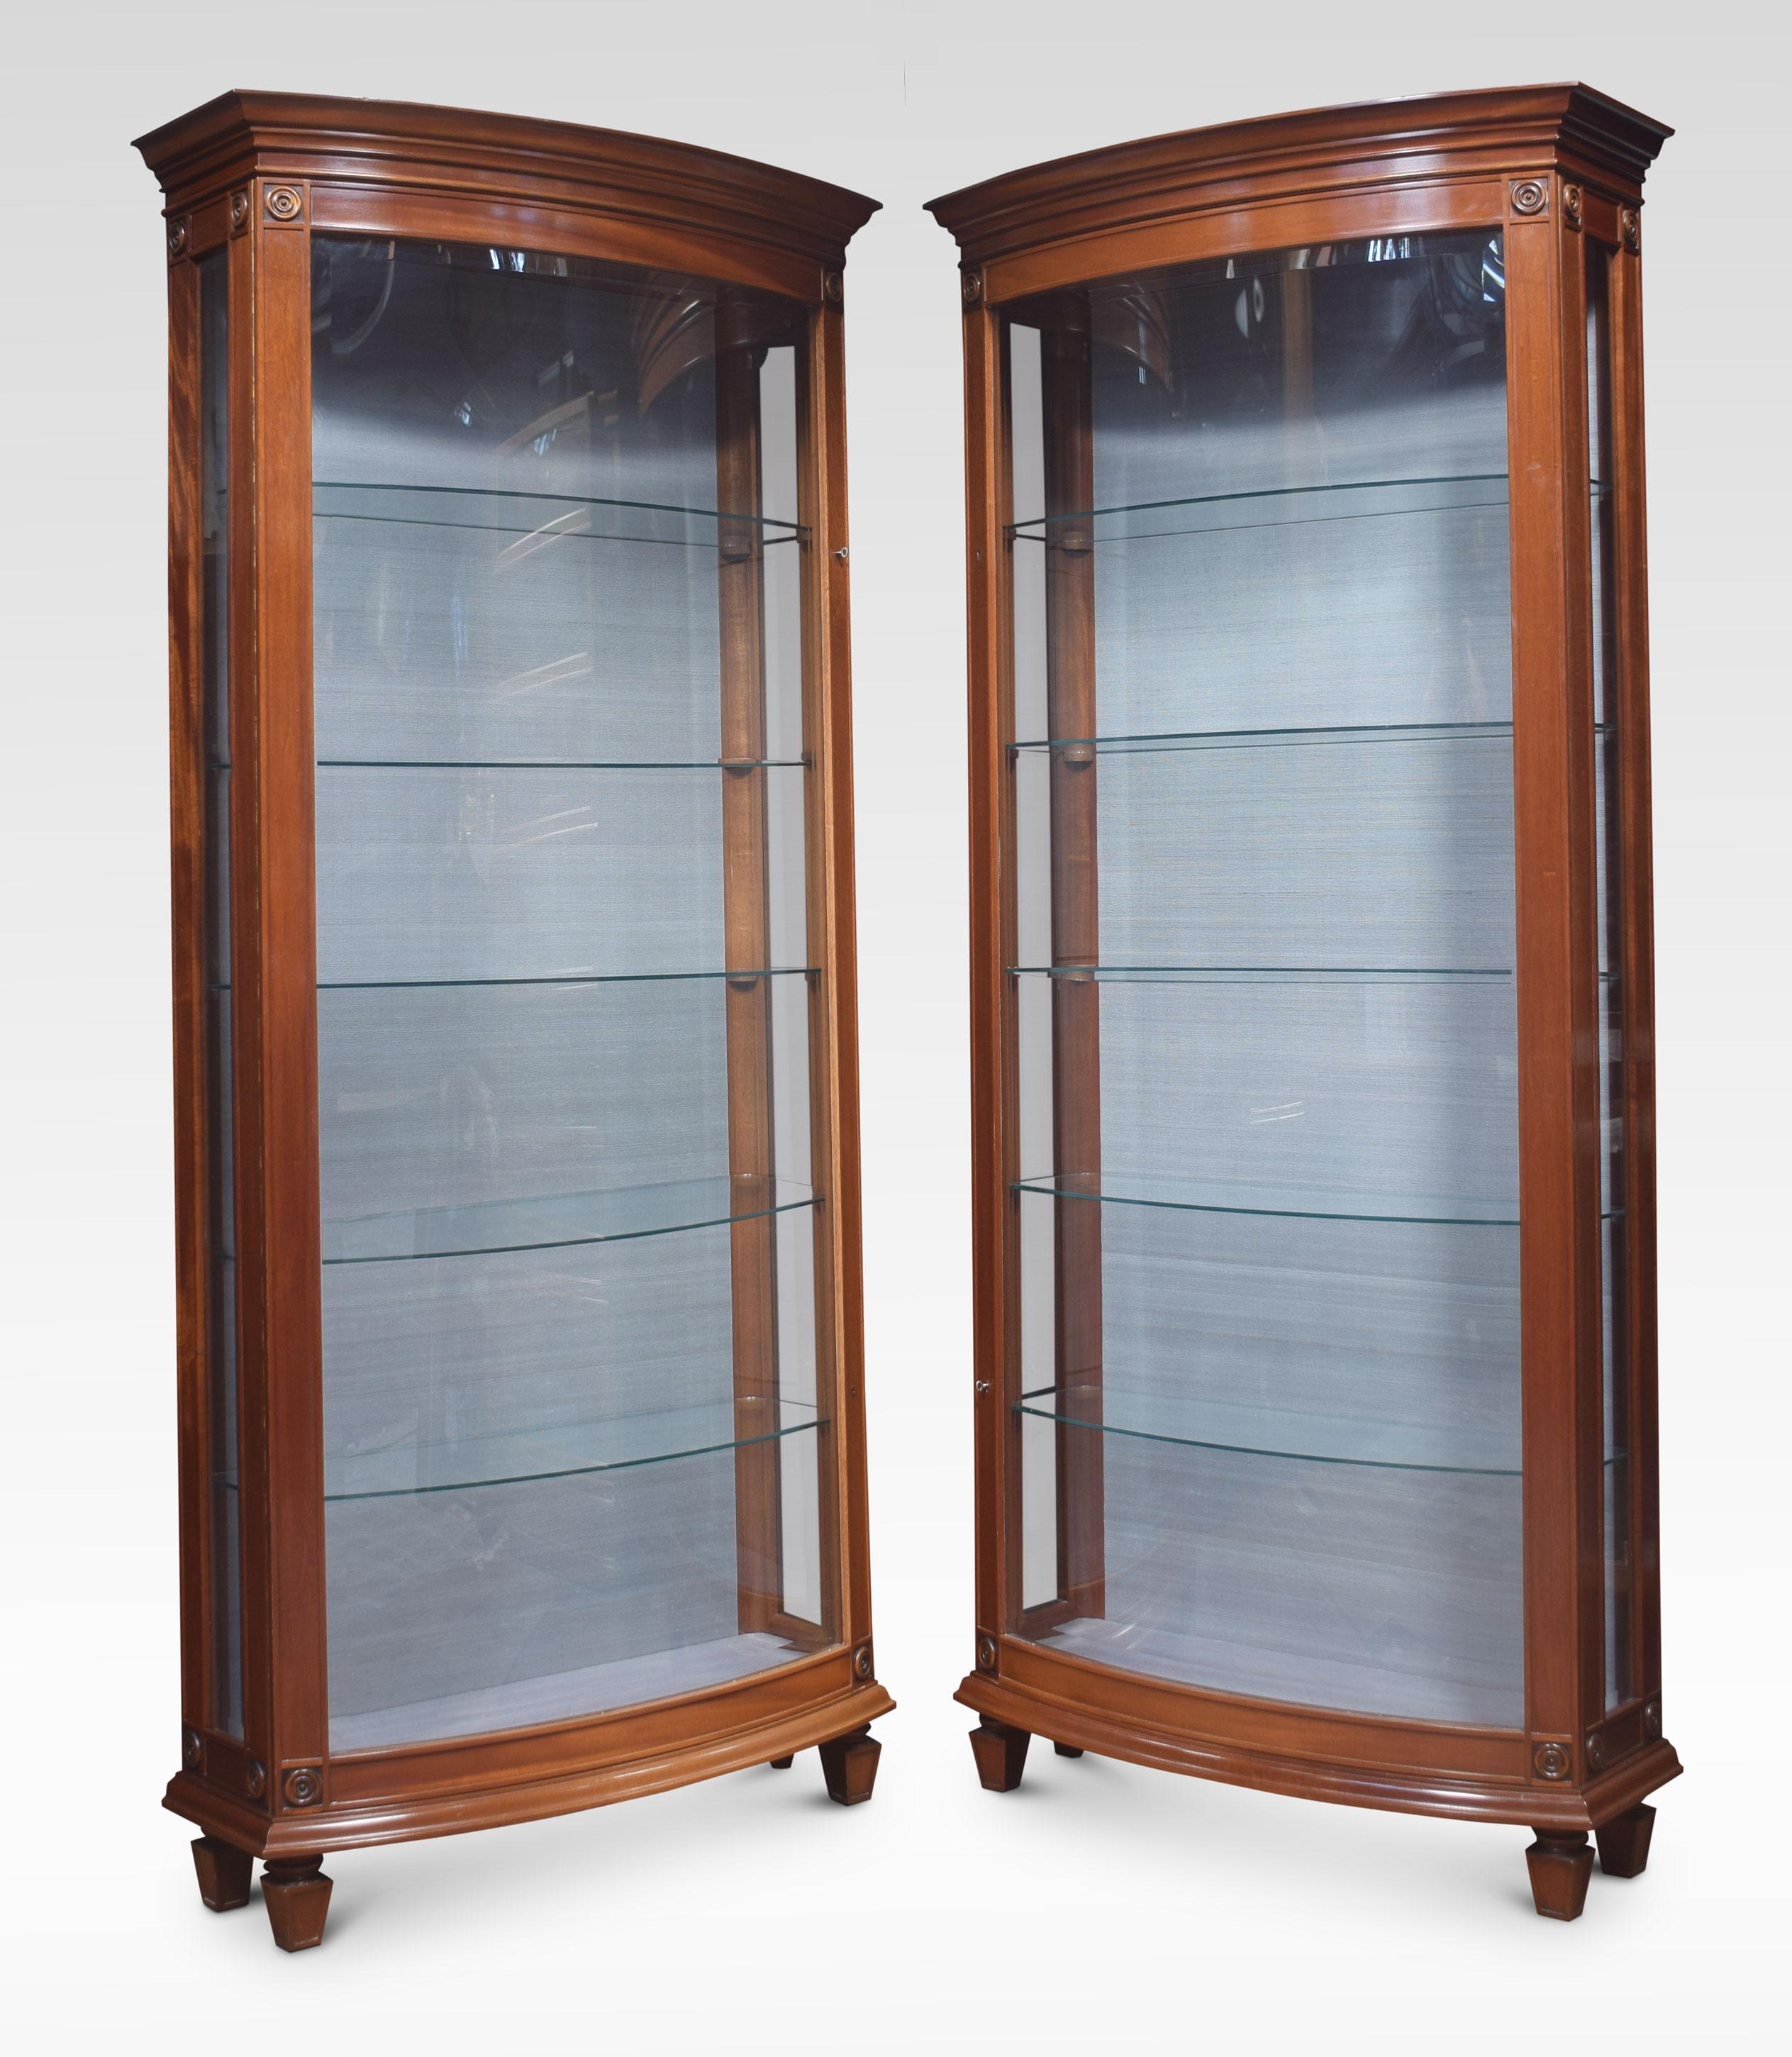 A pair of mahogany bow fronted glazed display cabinets, with a moulded cornice over a large curved beveled glass door, flanked by beveled glazed sides. The large doors opening to reveal silk upholstered interior and five glass shelves. All raised